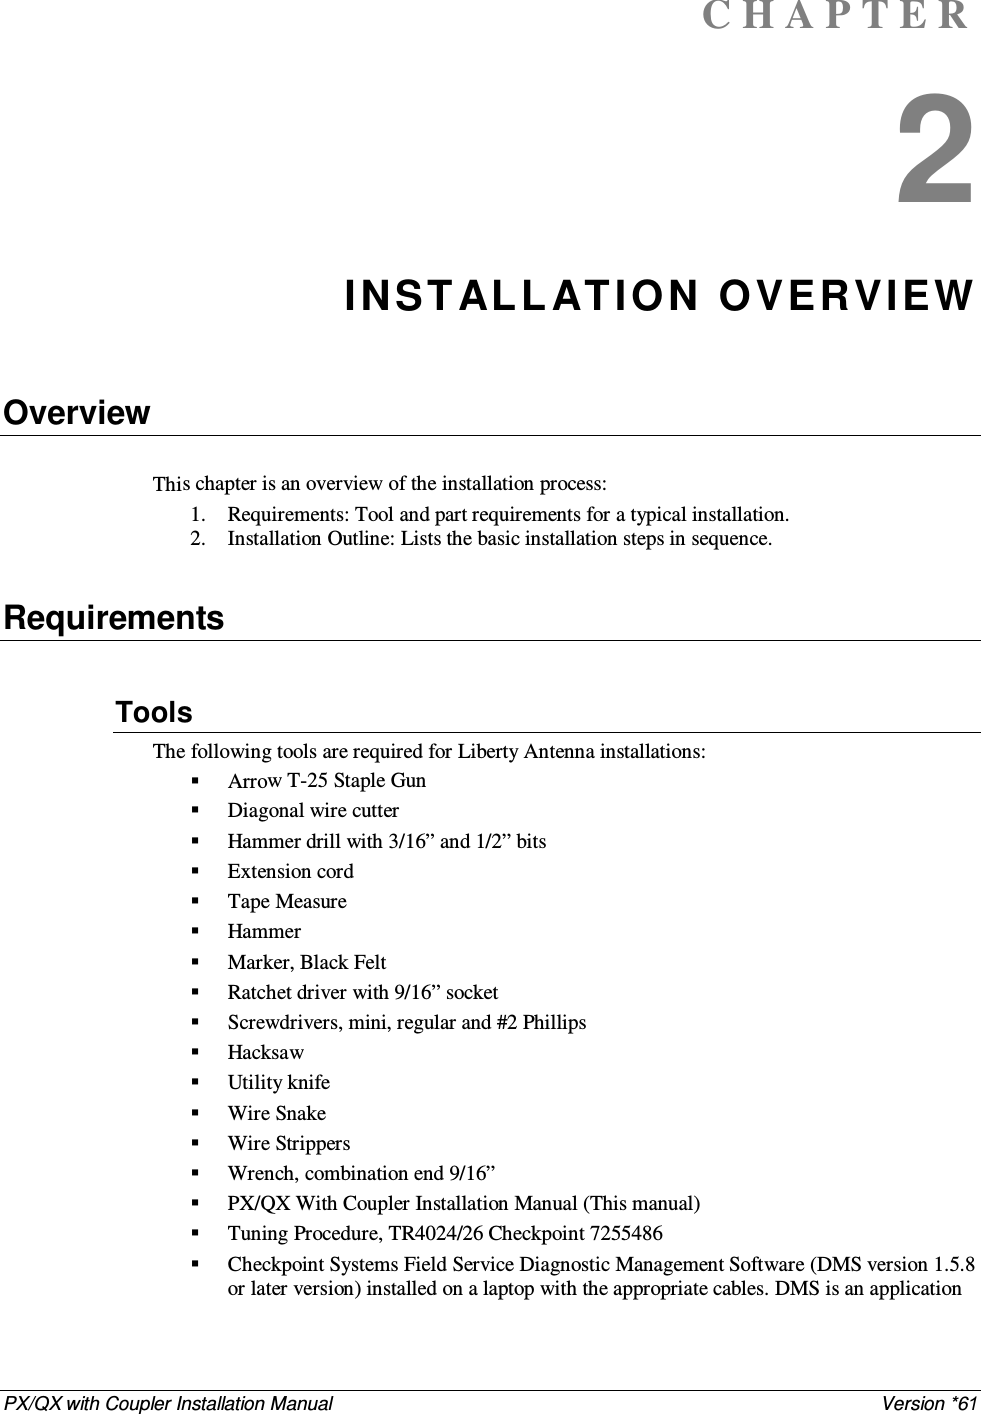 PX/QX with Coupler Installation Manual    Version *61 C H A P T E R  2 INST AL L AT IO N O VERVIEW   Overview  This chapter is an overview of the installation process:  1. Requirements: Tool and part requirements for a typical installation.  2. Installation Outline: Lists the basic installation steps in sequence.   Requirements  Tools  The following tools are required for Liberty Antenna installations:  Arrow T-25 Staple Gun  Diagonal wire cutter   Hammer drill with 3/16” and 1/2” bits  Extension cord   Tape Measure  Hammer   Marker, Black Felt   Ratchet driver with 9/16” socket  Screwdrivers, mini, regular and #2 Phillips   Hacksaw  Utility knife  Wire Snake  Wire Strippers   Wrench, combination end 9/16”  PX/QX With Coupler Installation Manual (This manual)  Tuning Procedure, TR4024/26 Checkpoint 7255486  Checkpoint Systems Field Service Diagnostic Management Software (DMS version 1.5.8 or later version) installed on a laptop with the appropriate cables. DMS is an application 